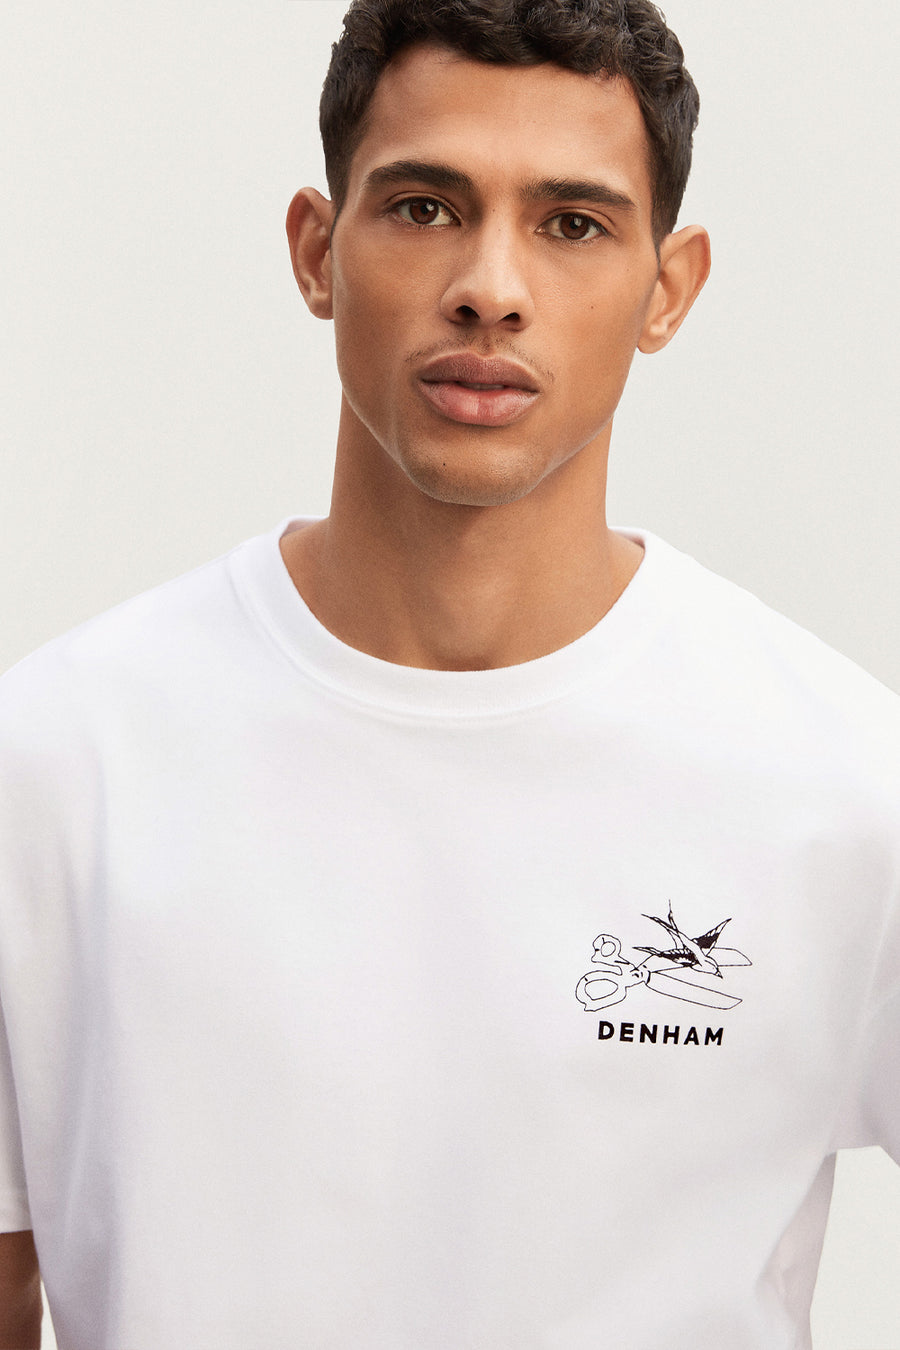 Buy the Denham DXT Fatale Heavy Jersey T-Shirt in White at Intro. Spend £50 for free UK delivery. Official stockists. We ship worldwide.